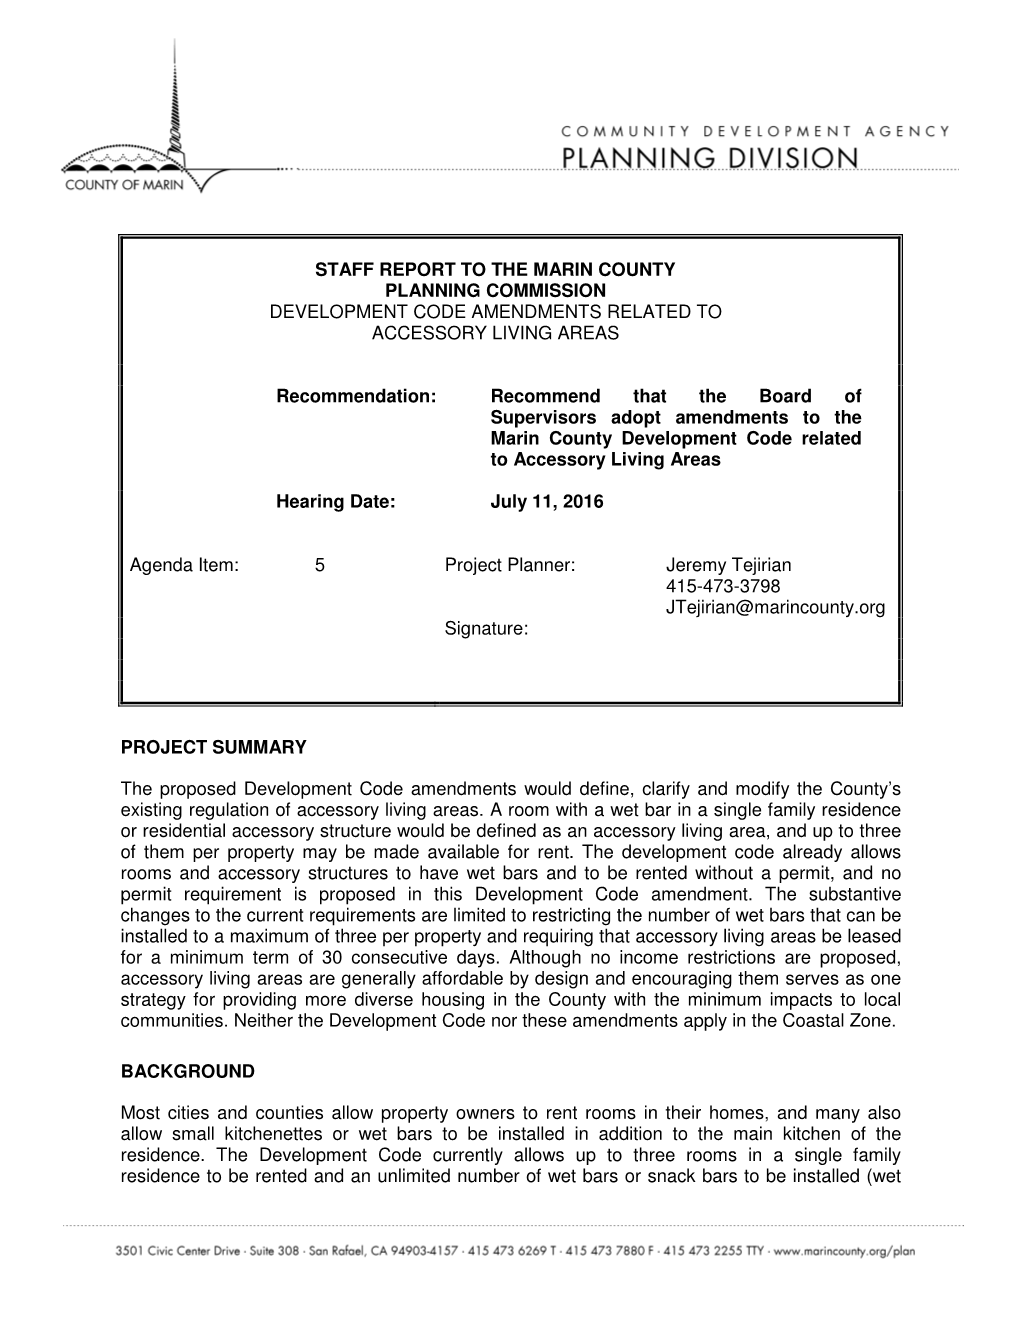 Staff Report to the Marin County Planning Commission Development Code Amendments Related to Accessory Living Areas